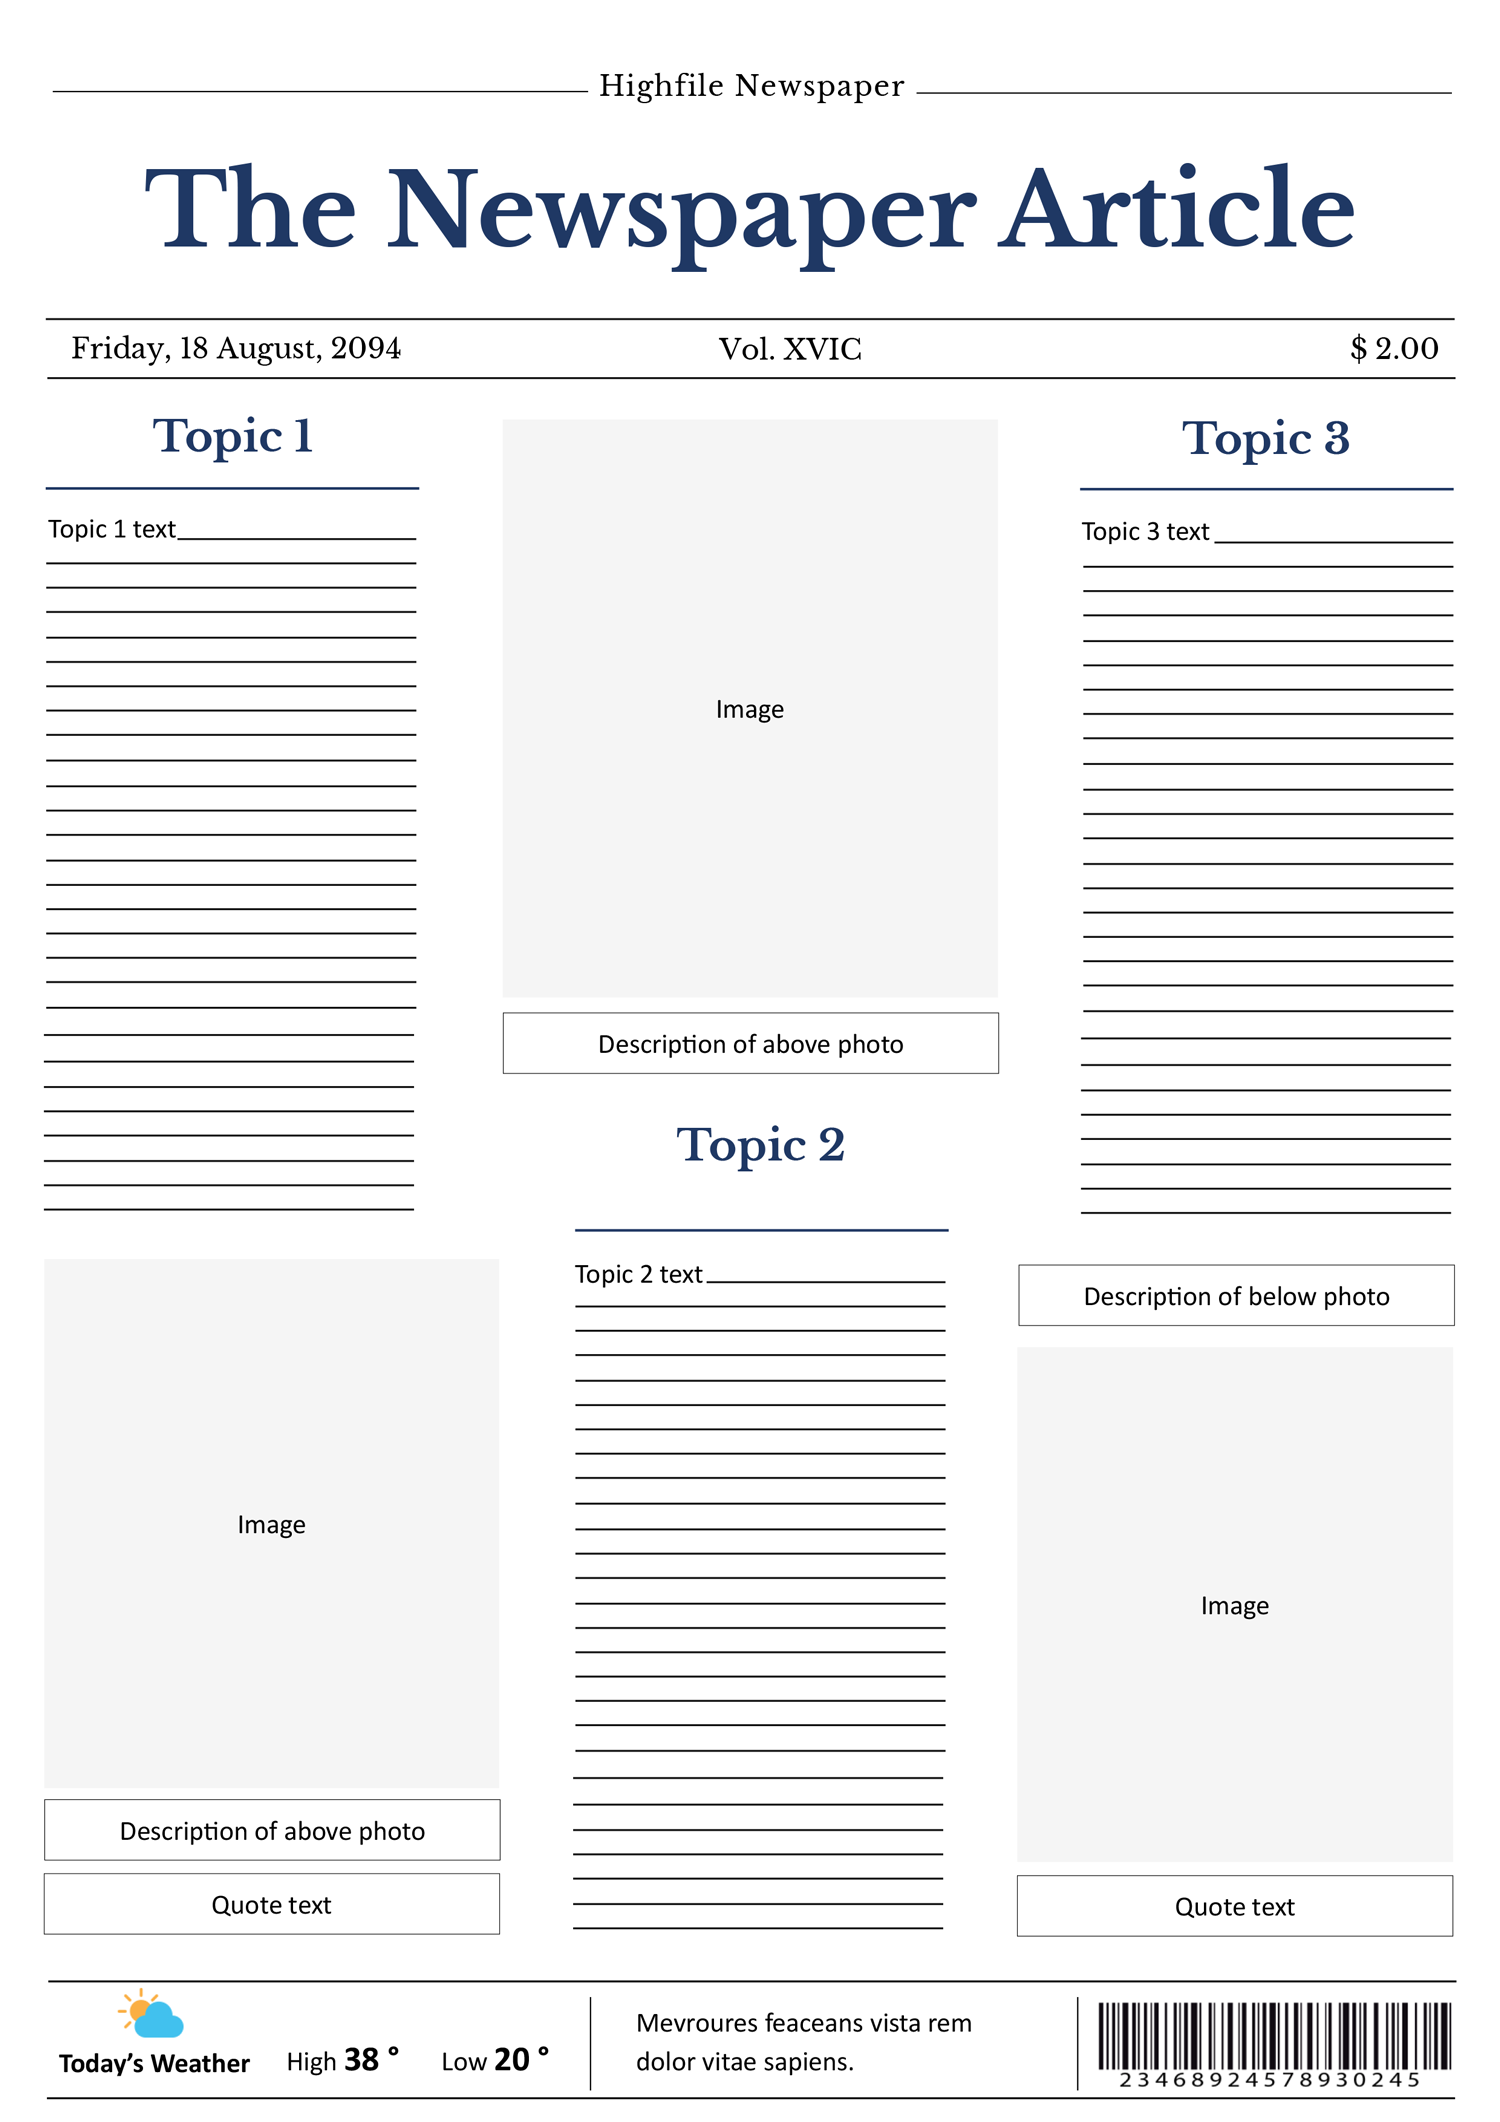 Newspaper Article Layout Template - Page 01